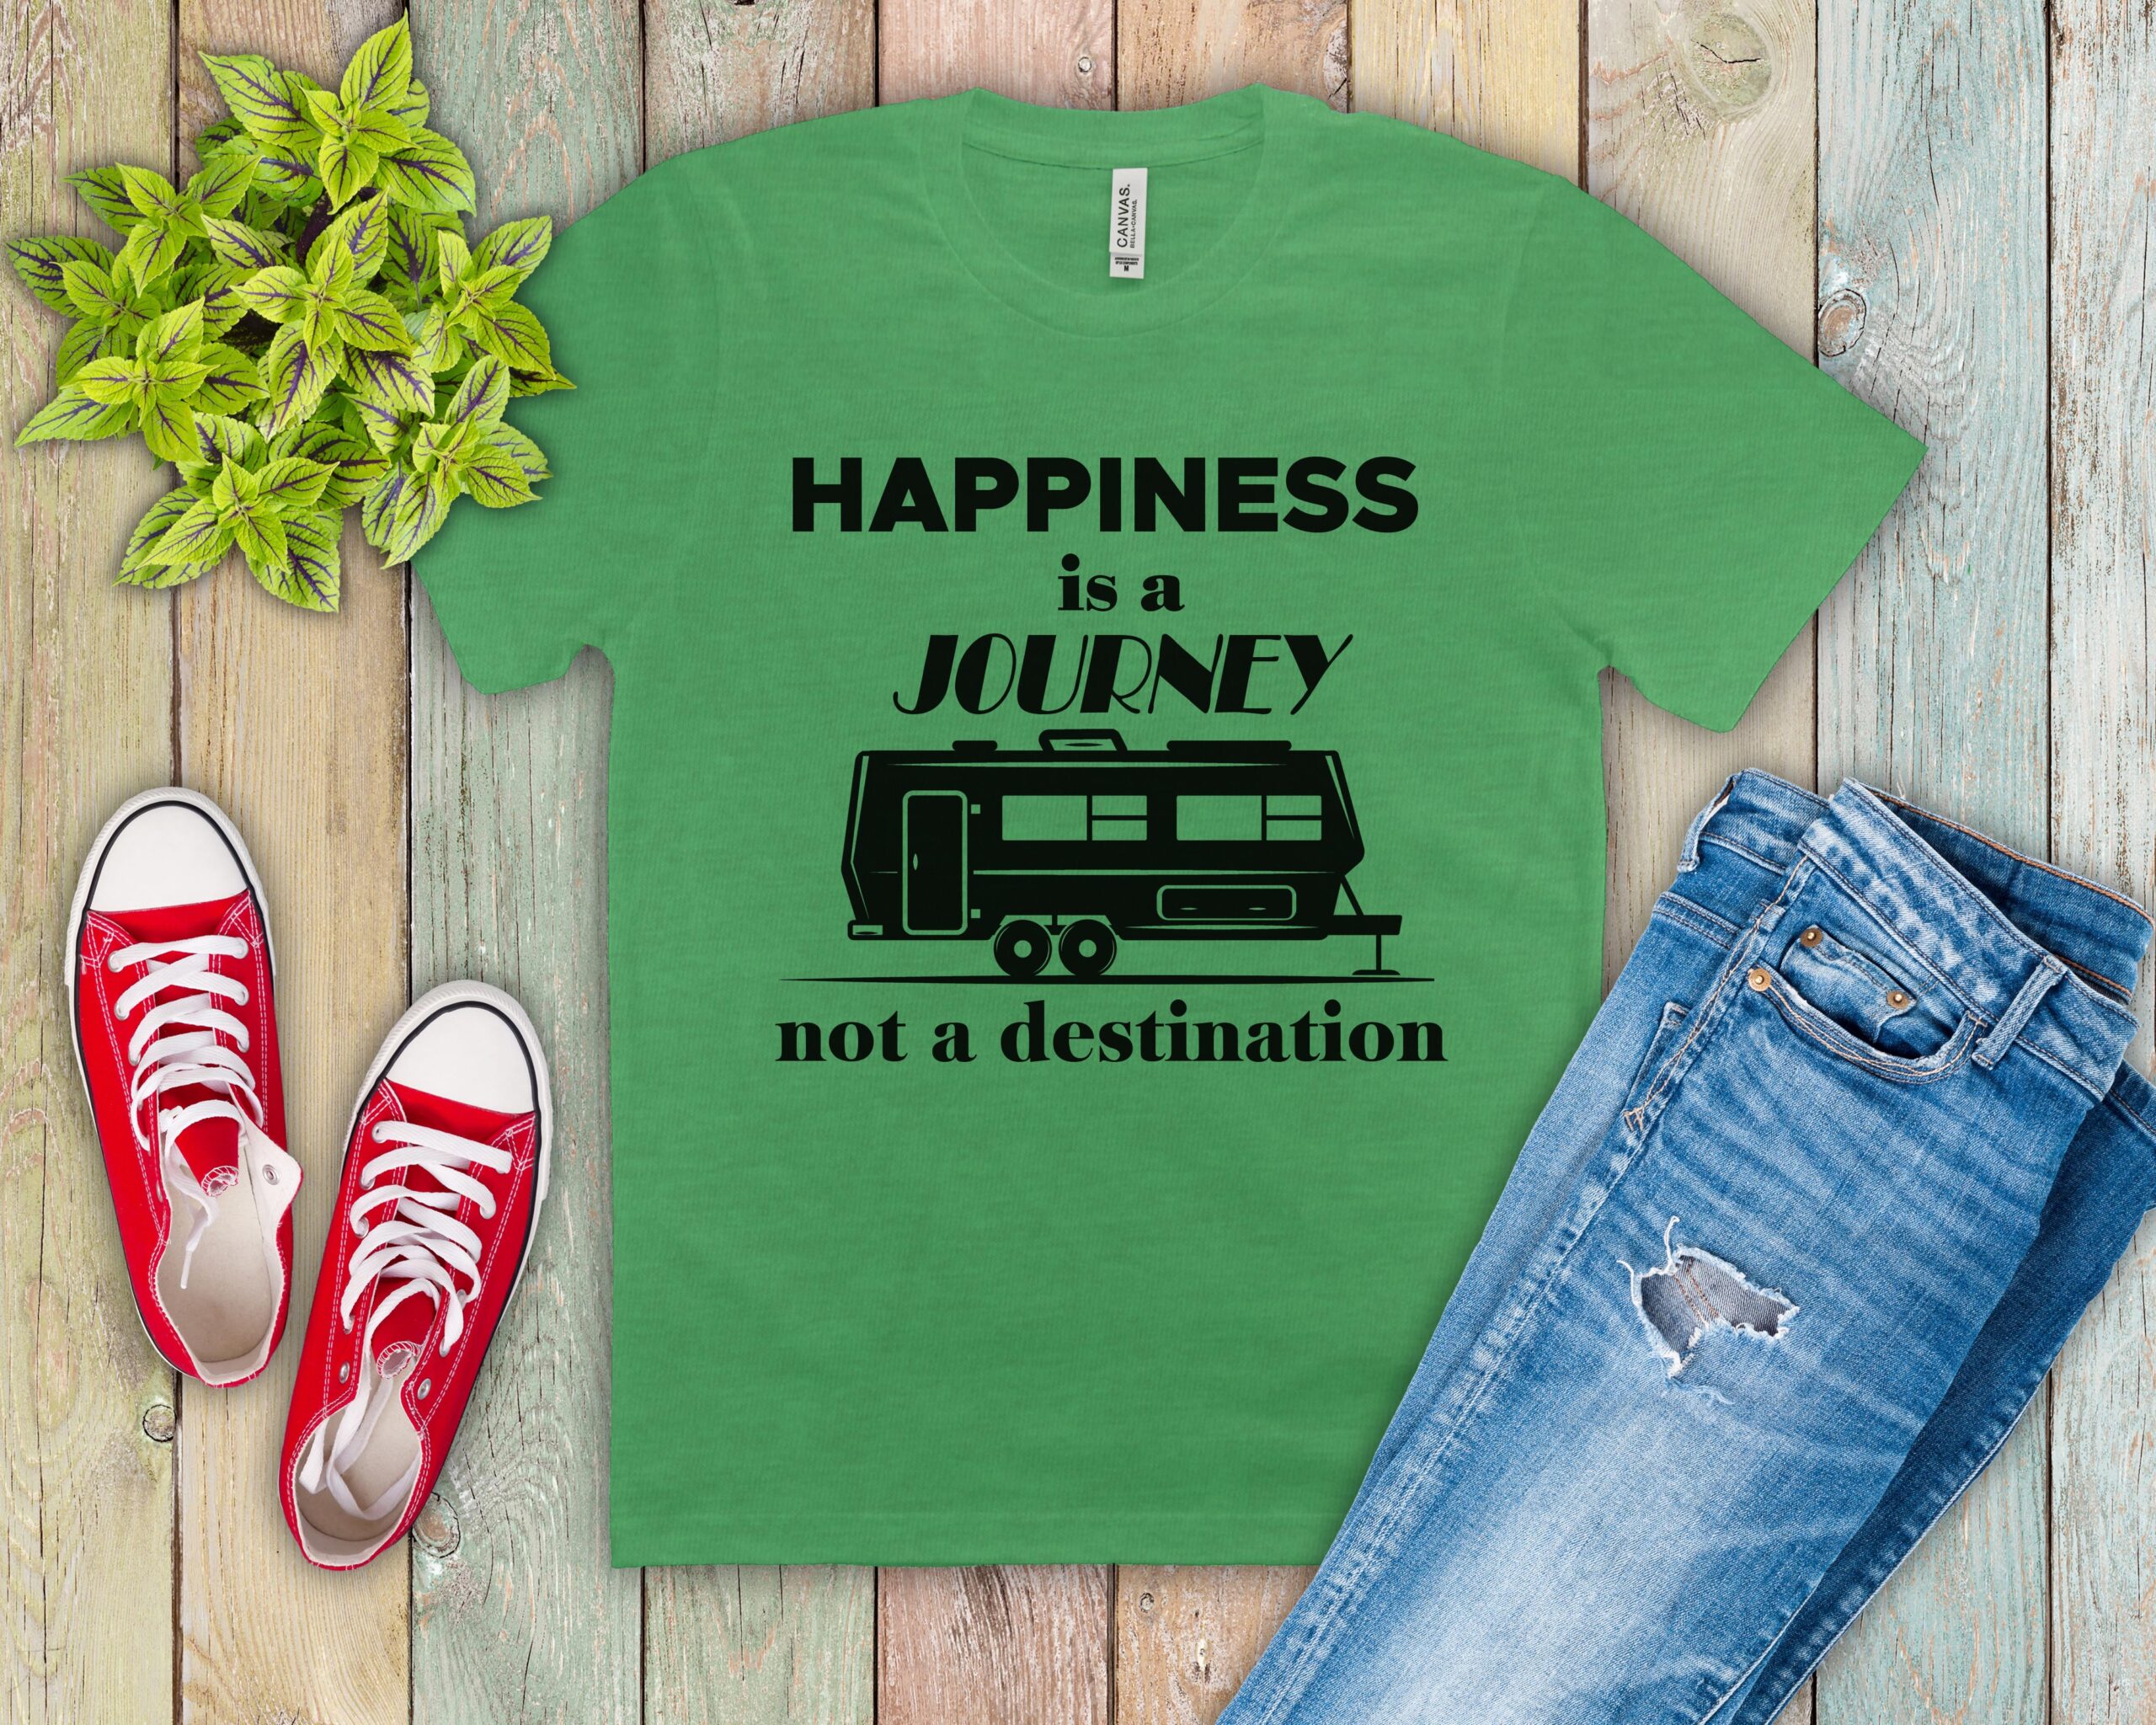 Free Happiness is a Journey SVG Cutting File for the Cricut.